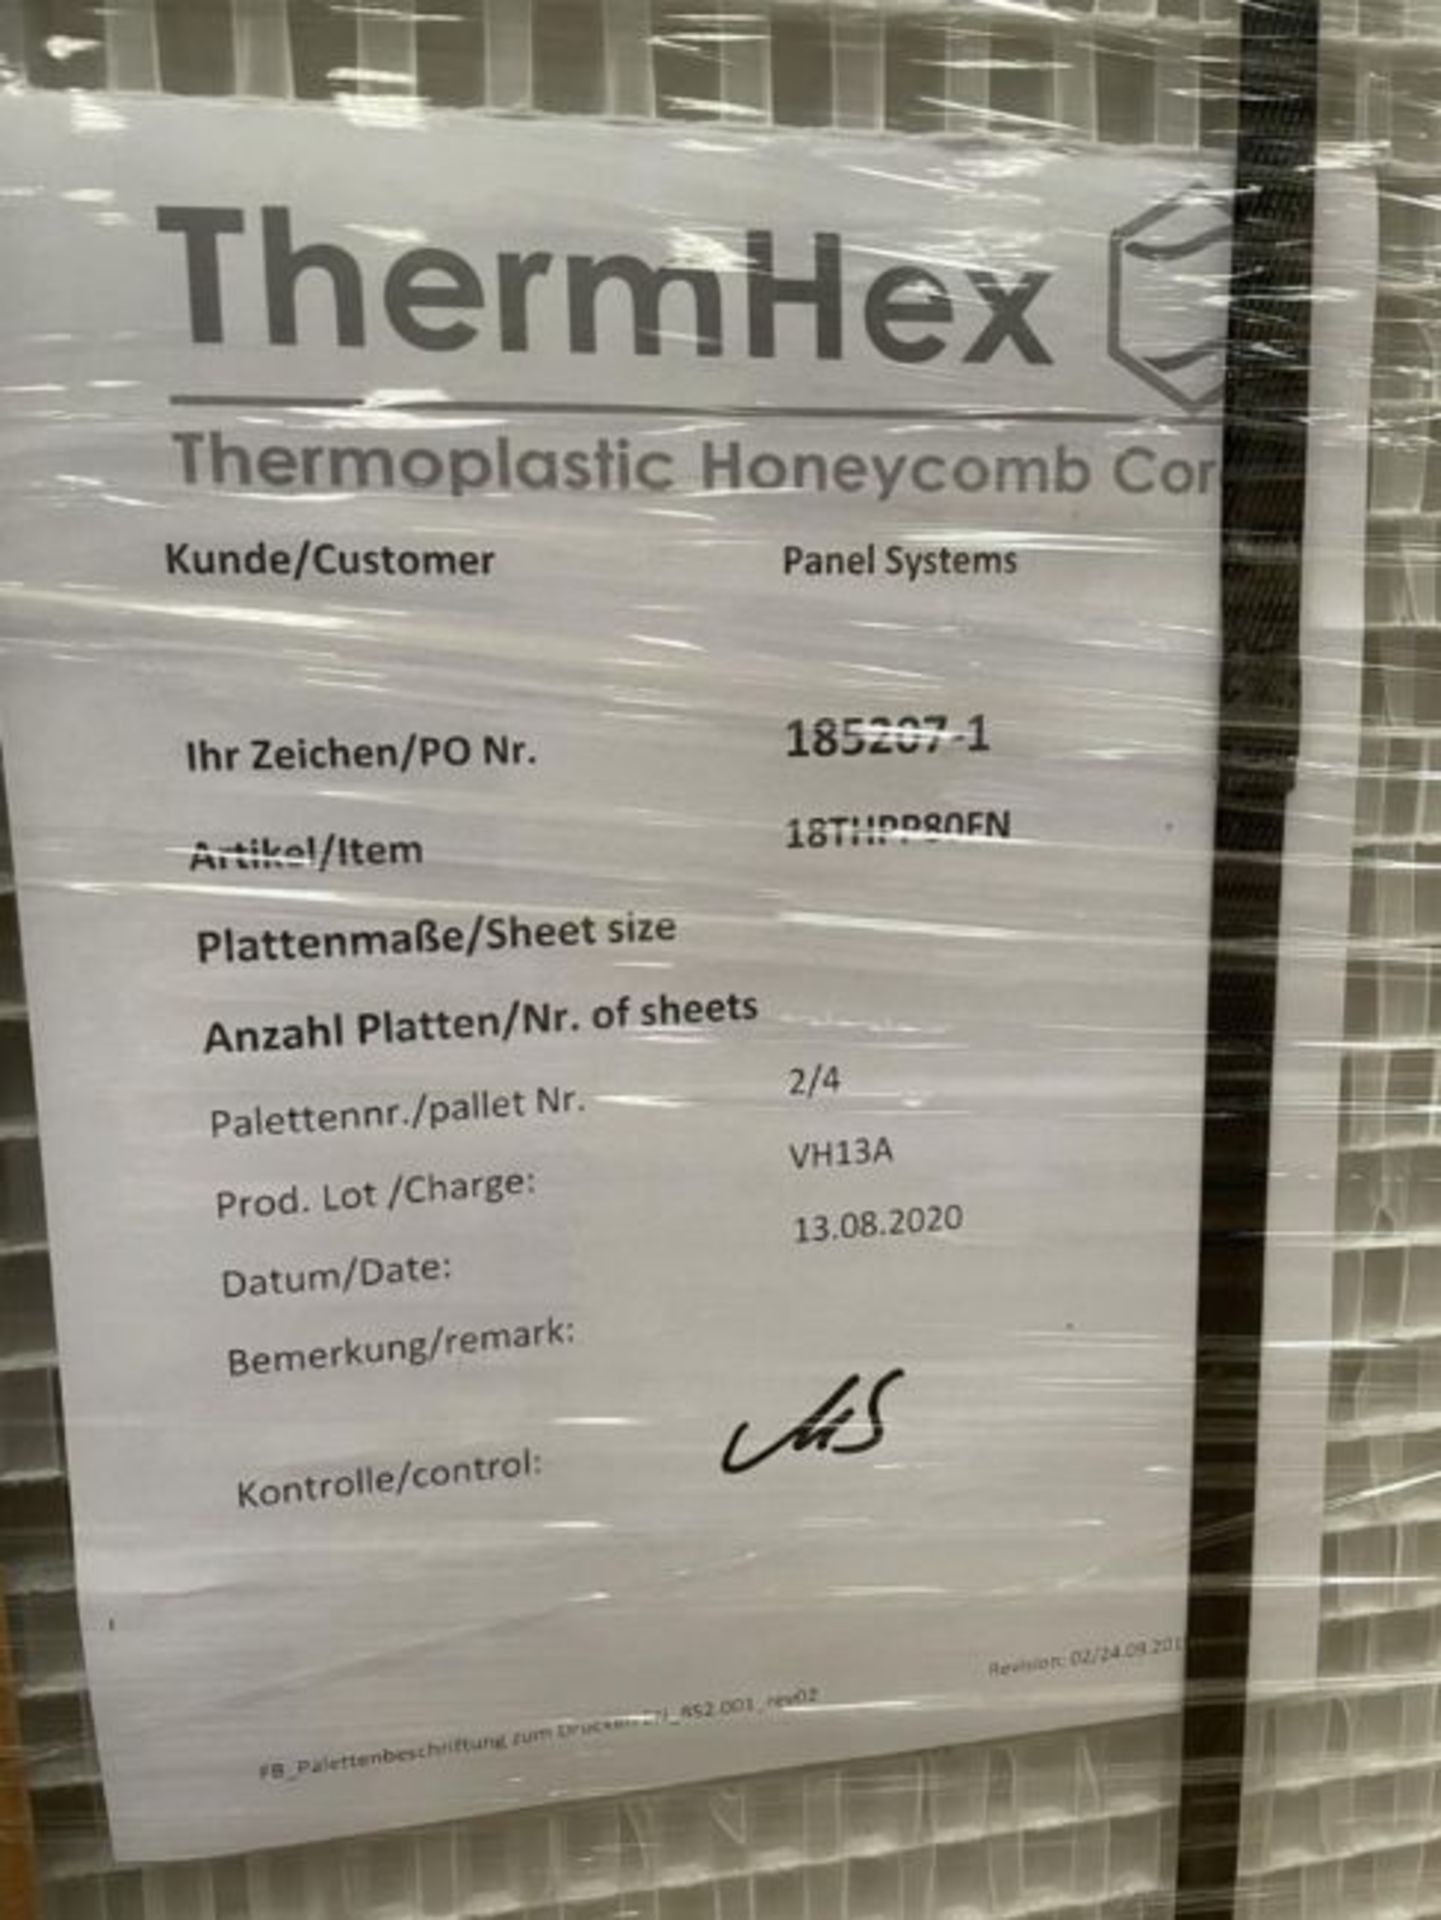 24 x ThermHex Thermoplastic Honeycomb Core Panels - Size 3175 x 1210 x 20mm - New Stock - - Image 5 of 7